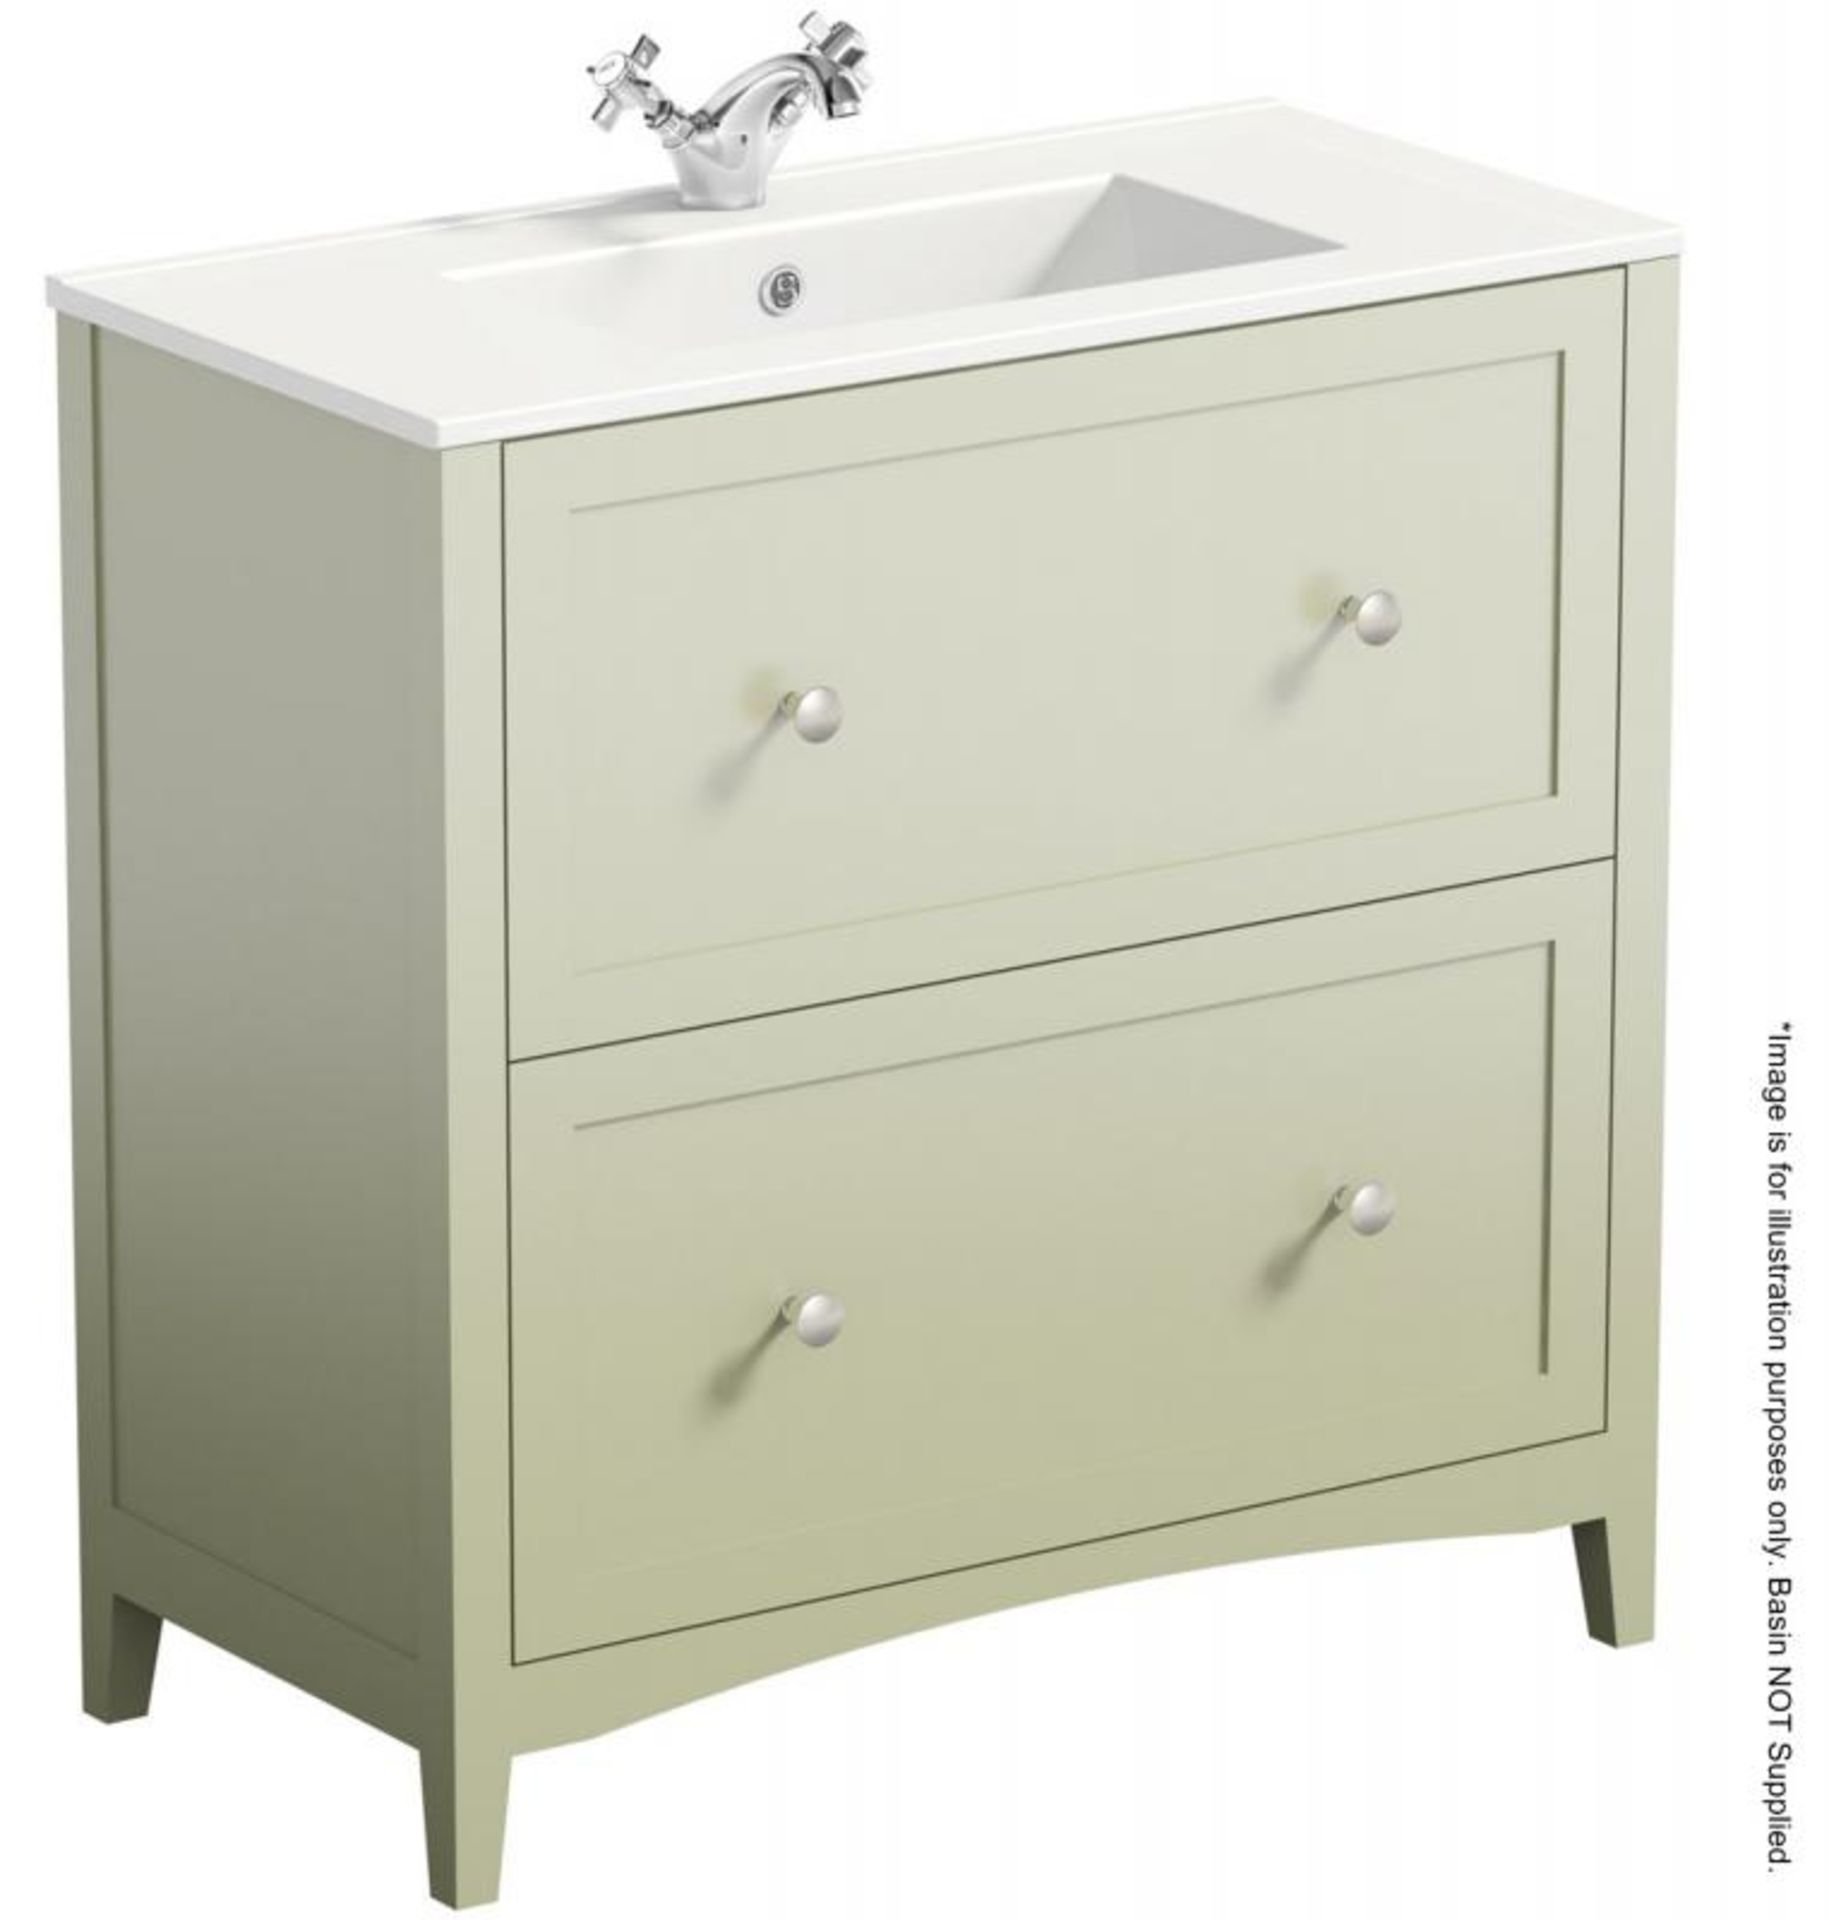 1 x Camberley 800 2-Drawer Soft Close Vanity Unit In Sage Green - New / Unused Stock - Dimensions: W - Image 3 of 8